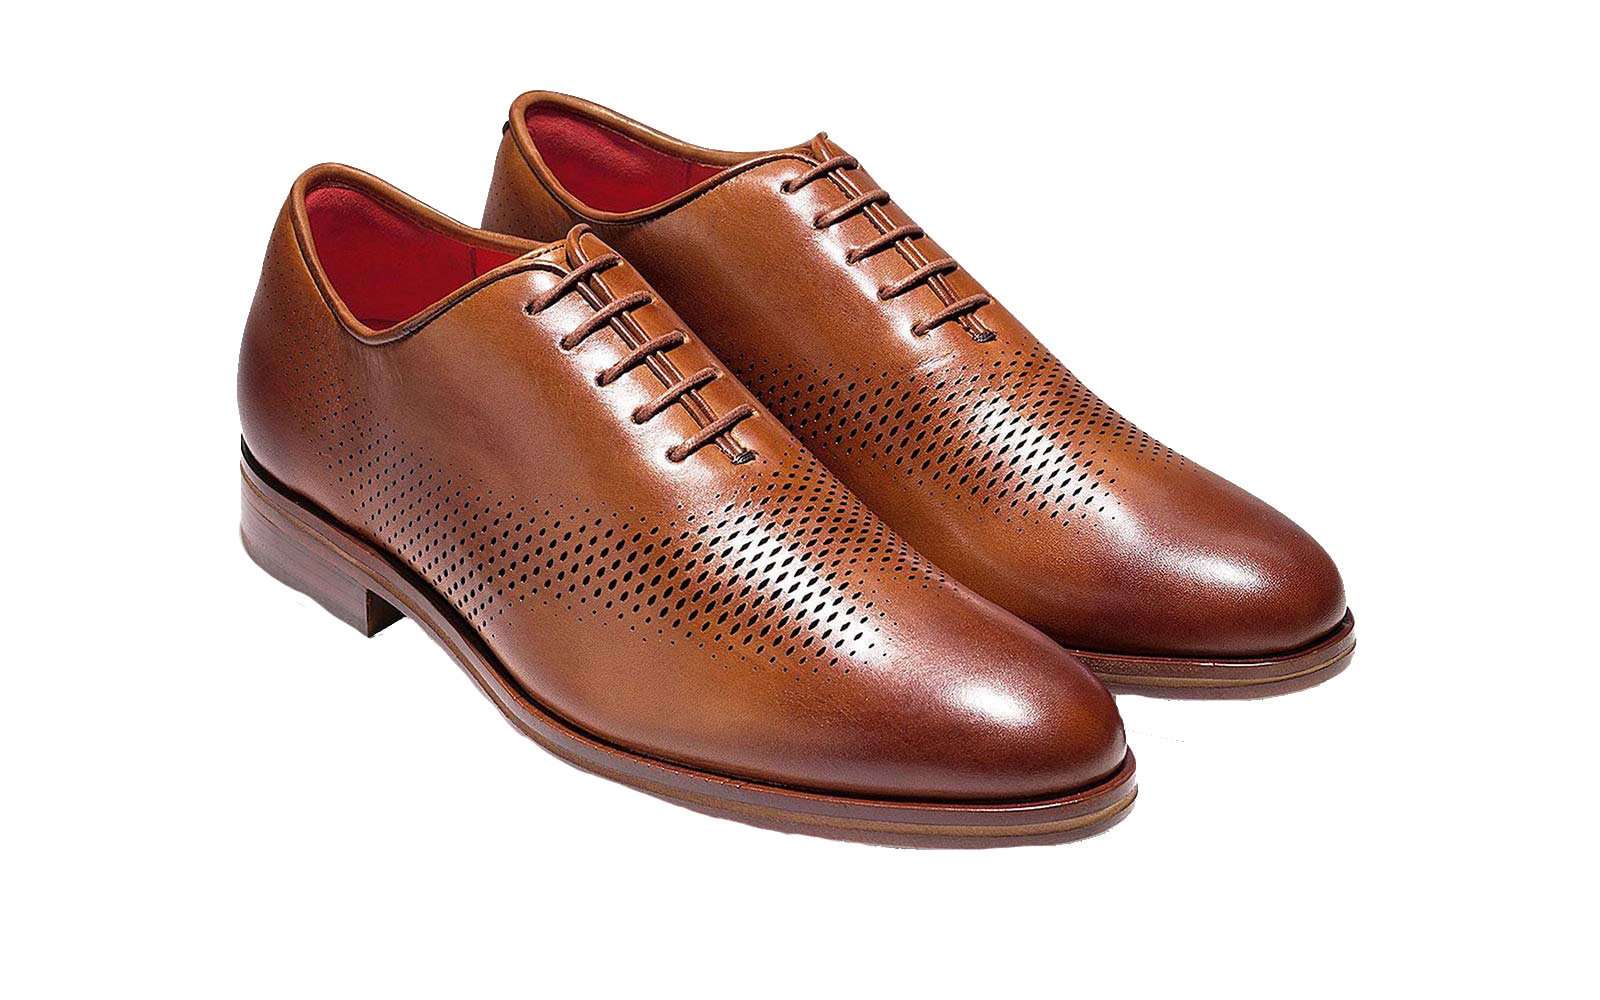 The 12 Most Comfortable Dress Shoes for Men